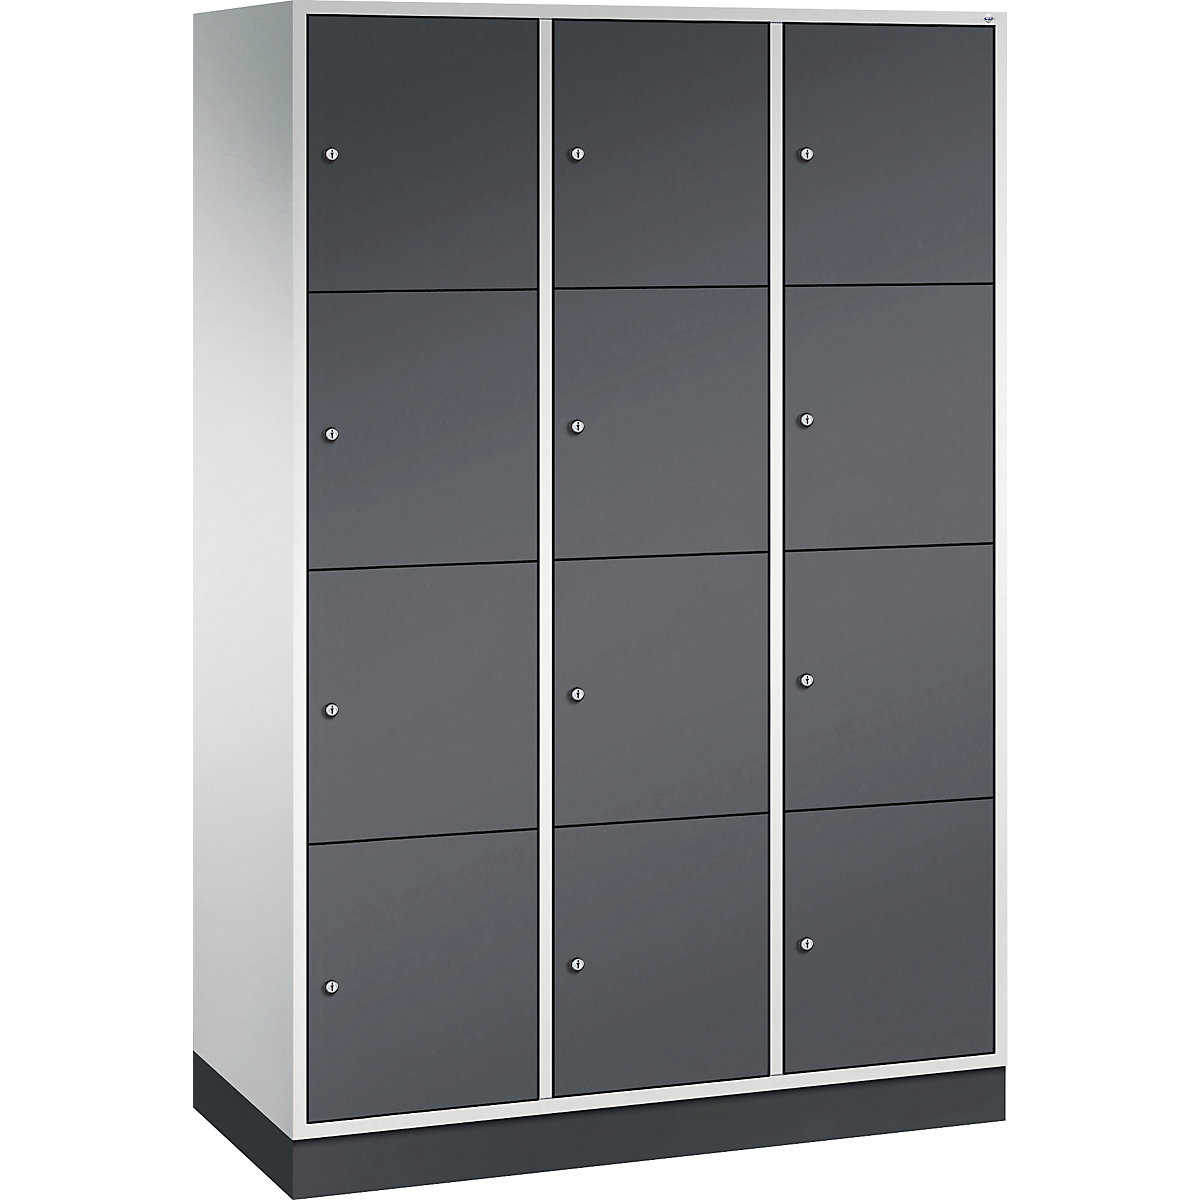 INTRO steel compartment locker, compartment height 435 mm – C+P, WxD 1220 x 500 mm, 12 compartments, light grey body, black grey doors